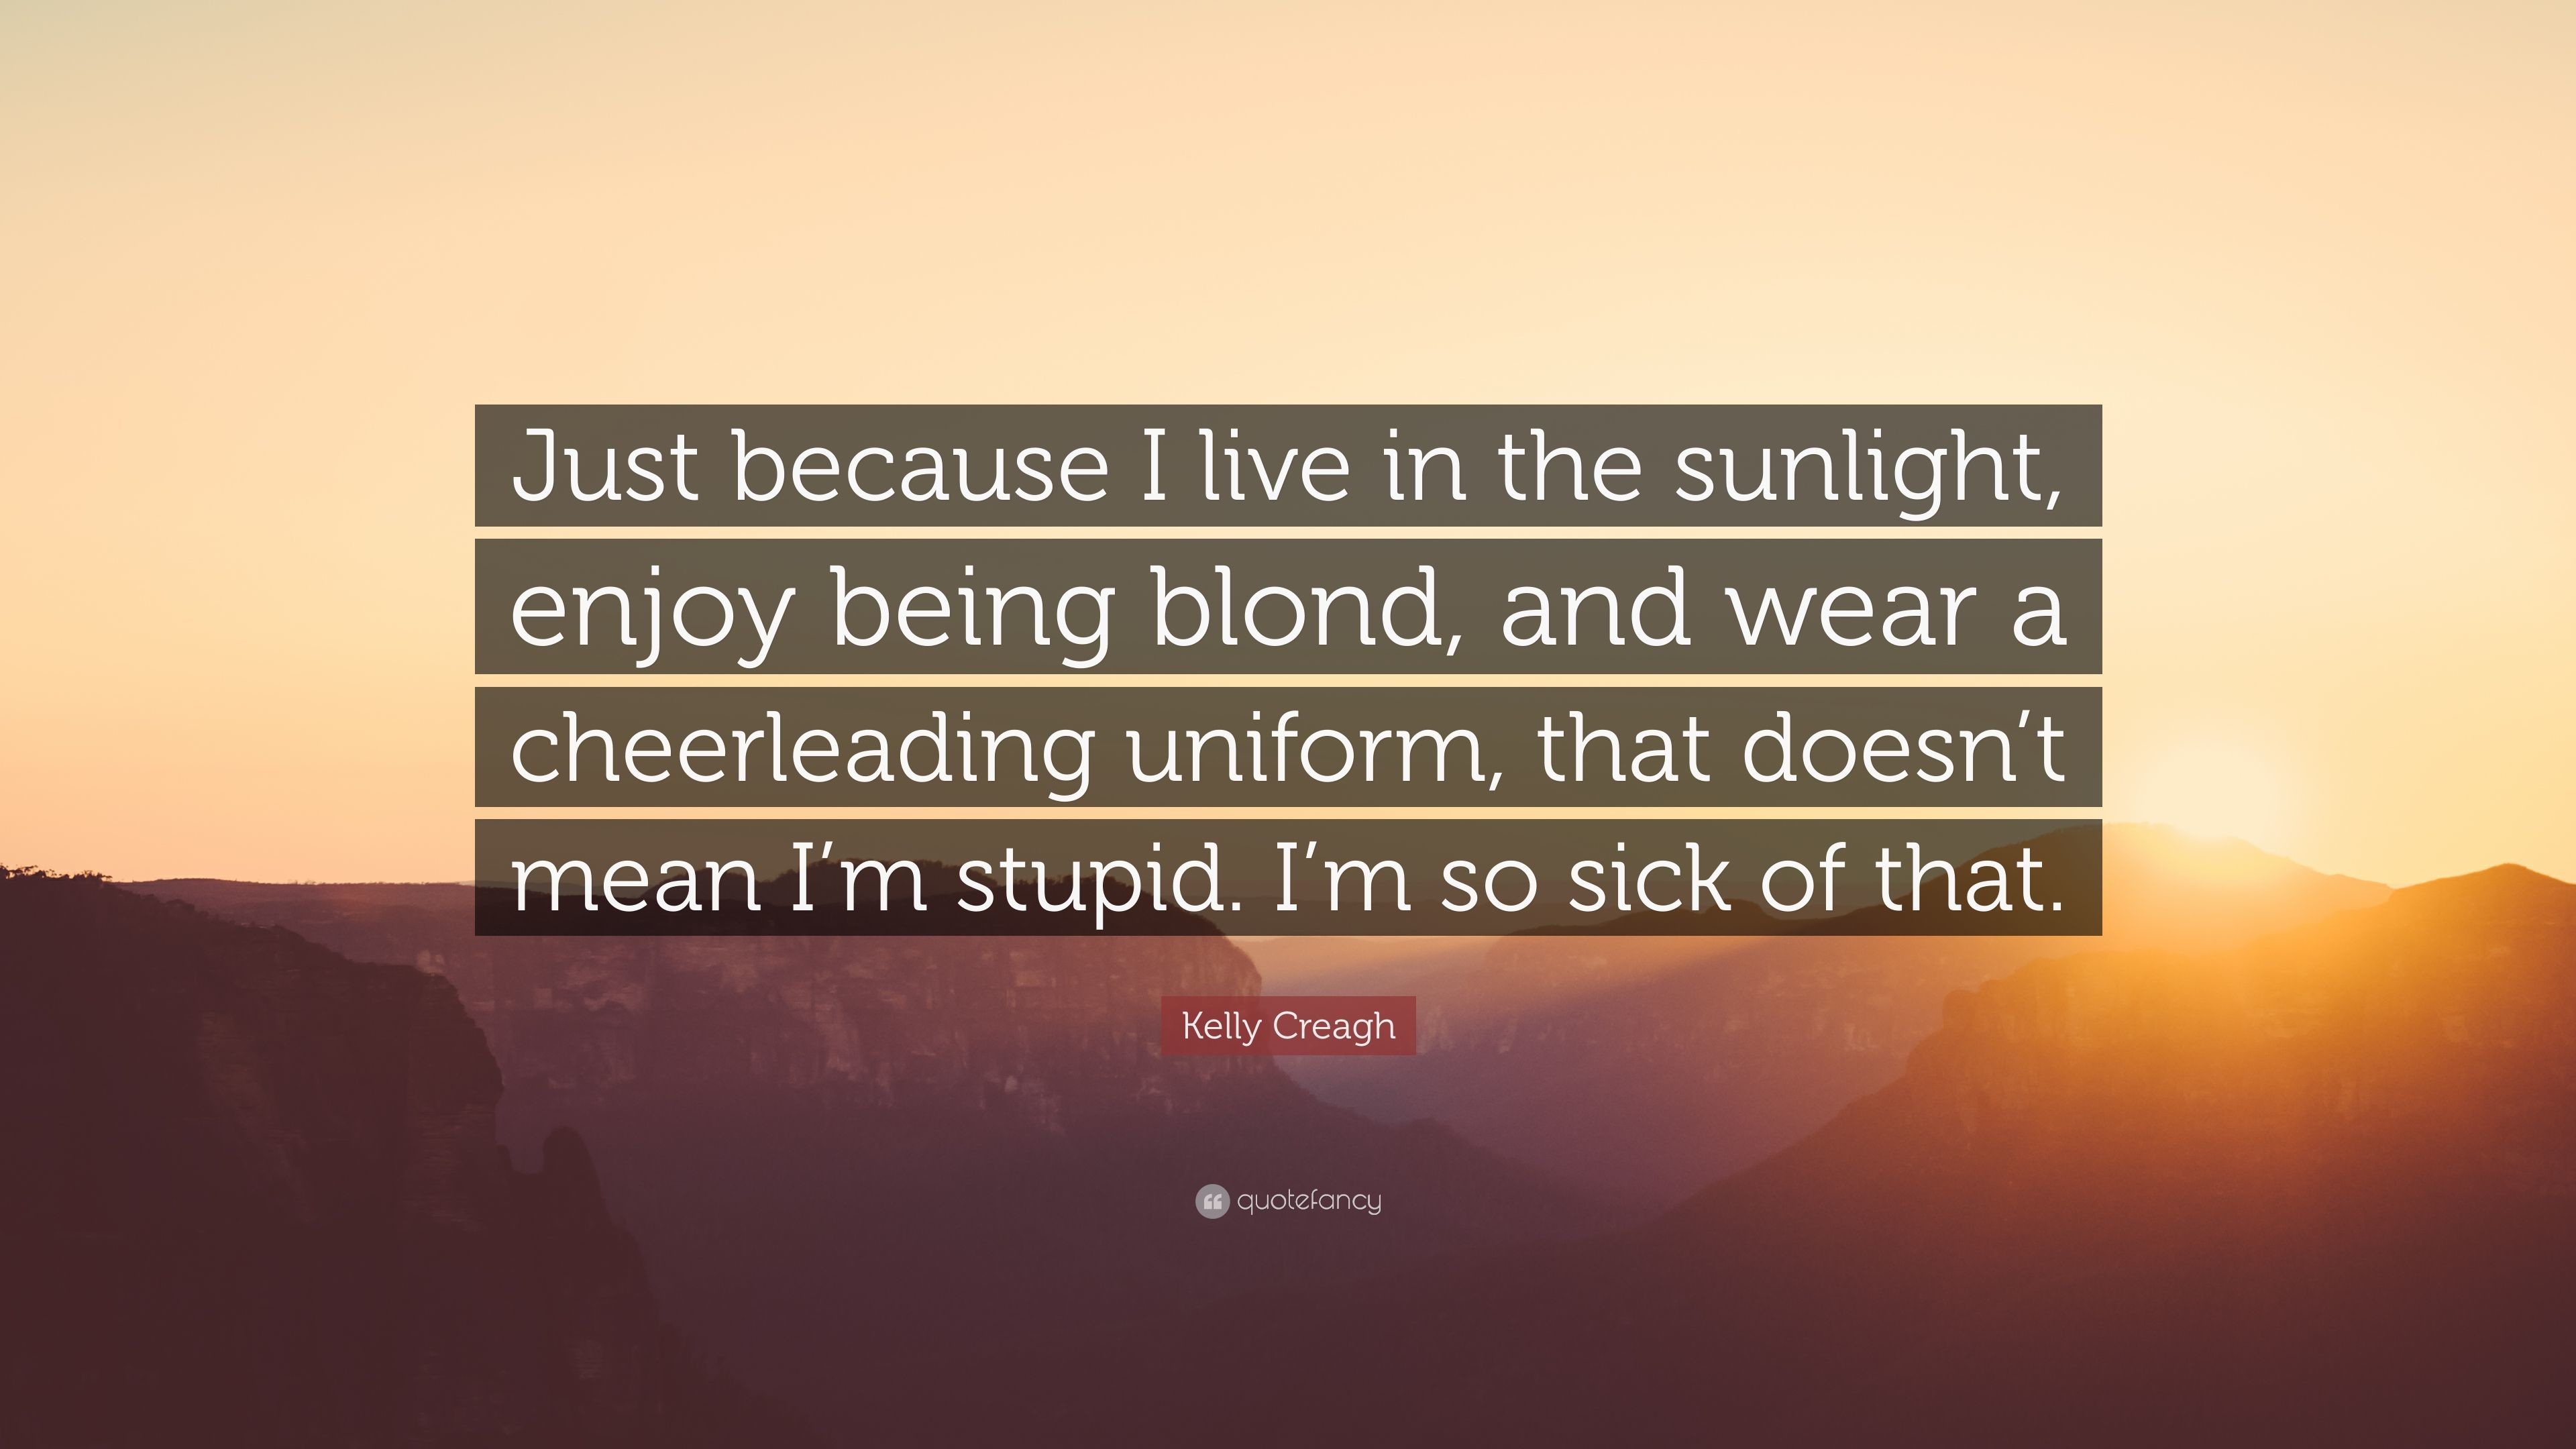 3840x2160 Kelly Creagh Quote: “Just because I live in the sunlight, enjoy being blond